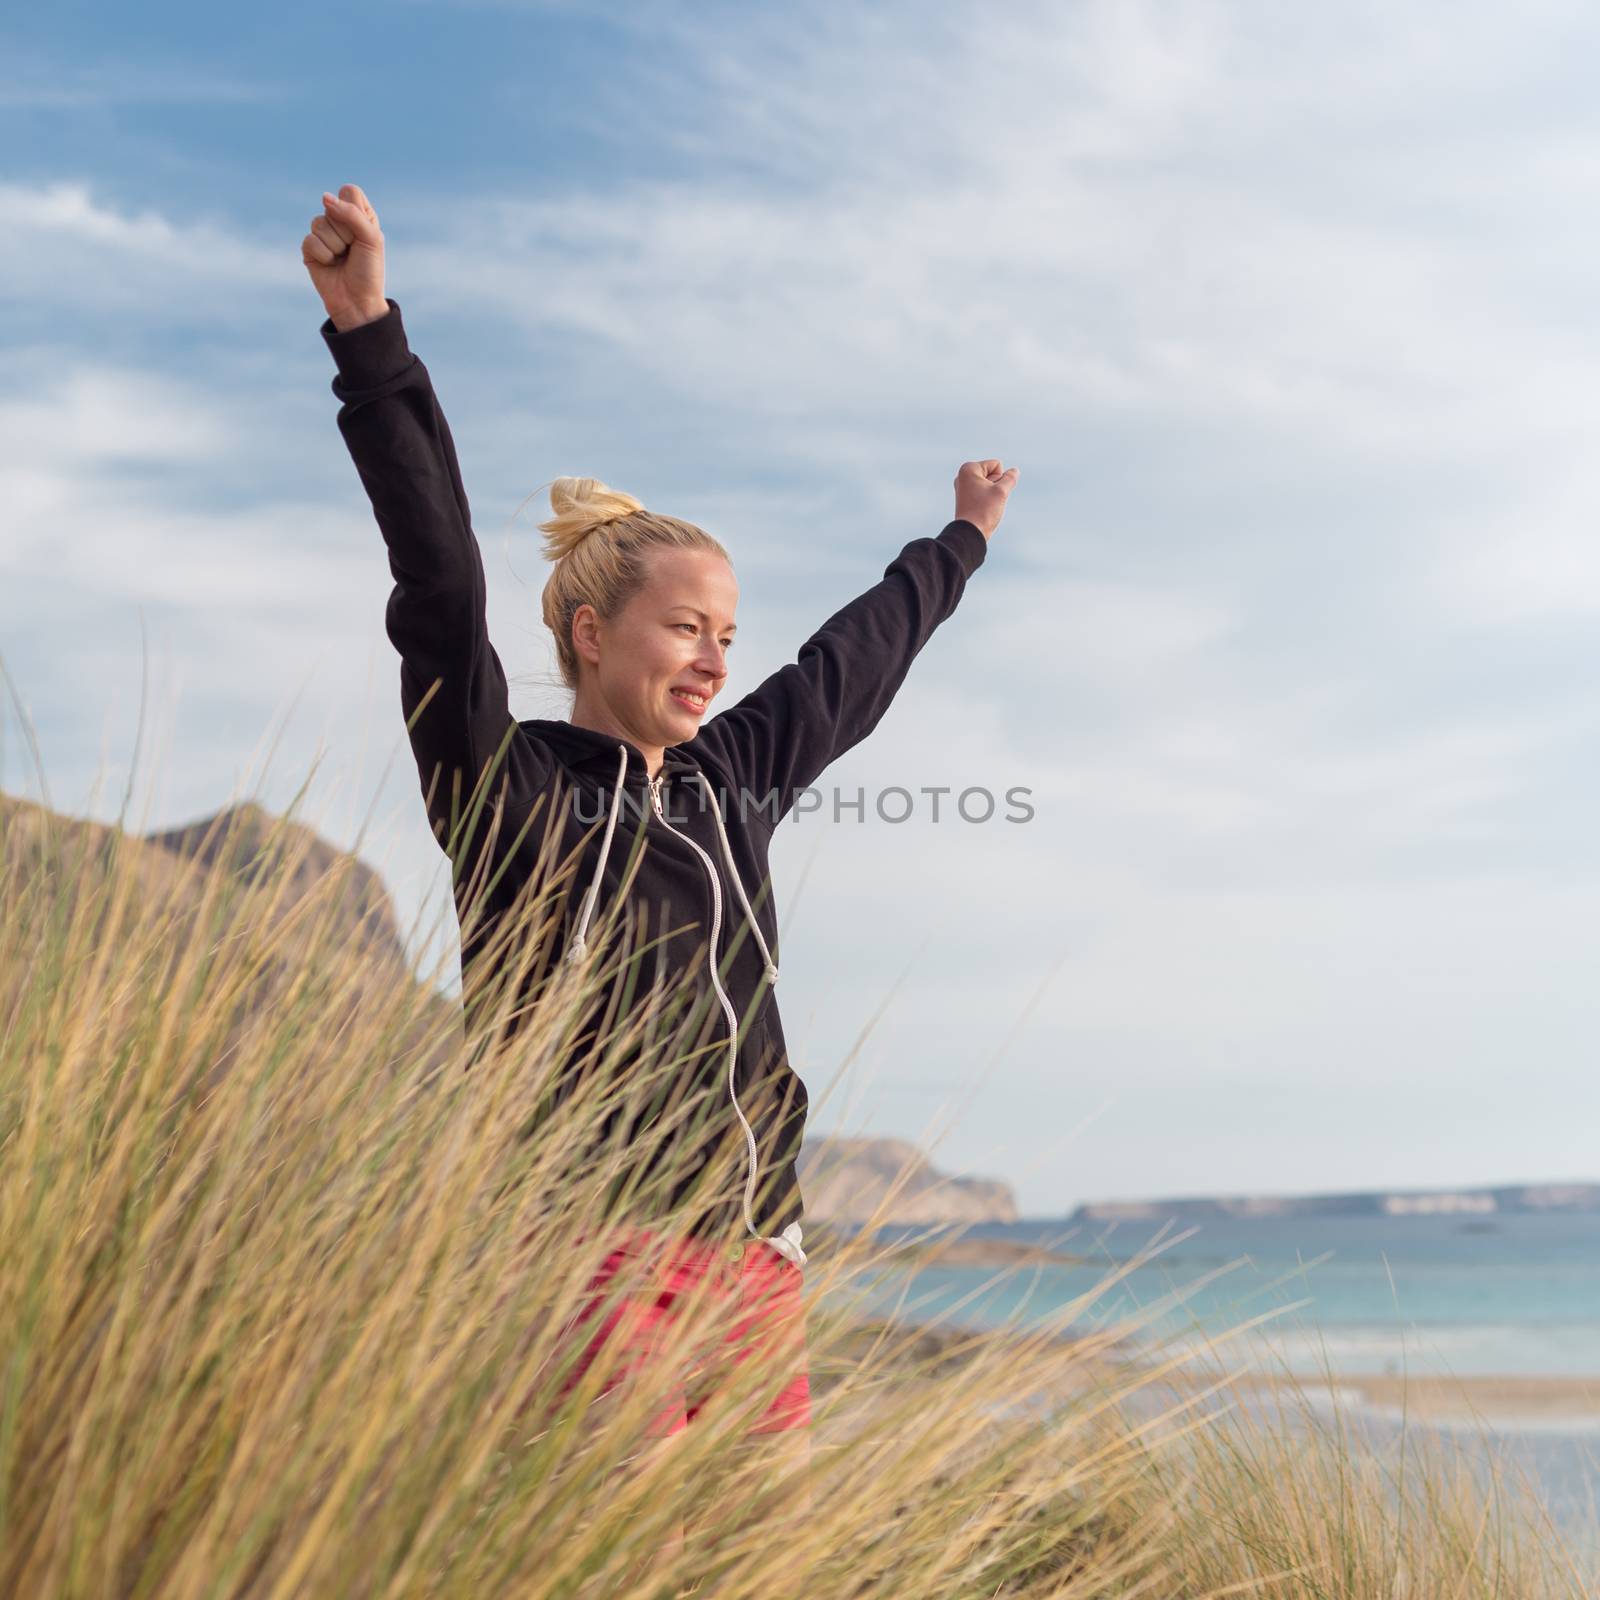 Active sporty woman, arms rised, enjoying sun, freedom and life an a beautiful beach. Young lady feeling free, relaxed and happy. Active lifestyle outdoors. Made it.